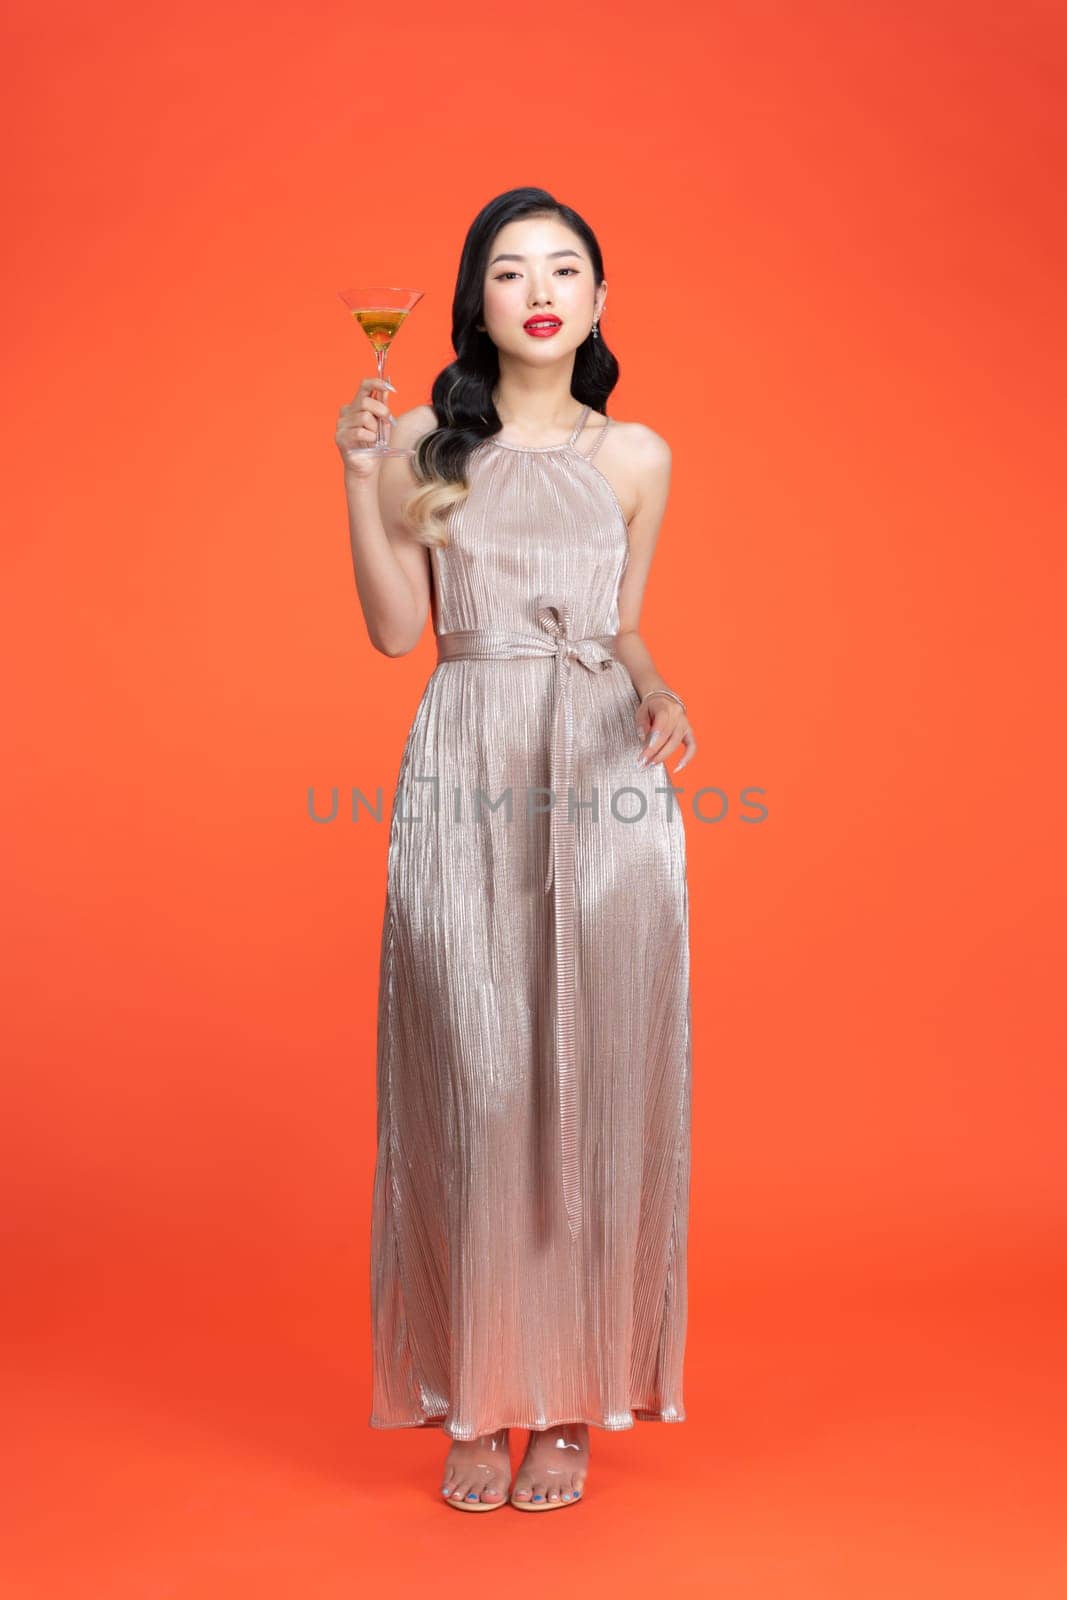 Fashionable lady in shiny stylish dress holding glass with drink on red background